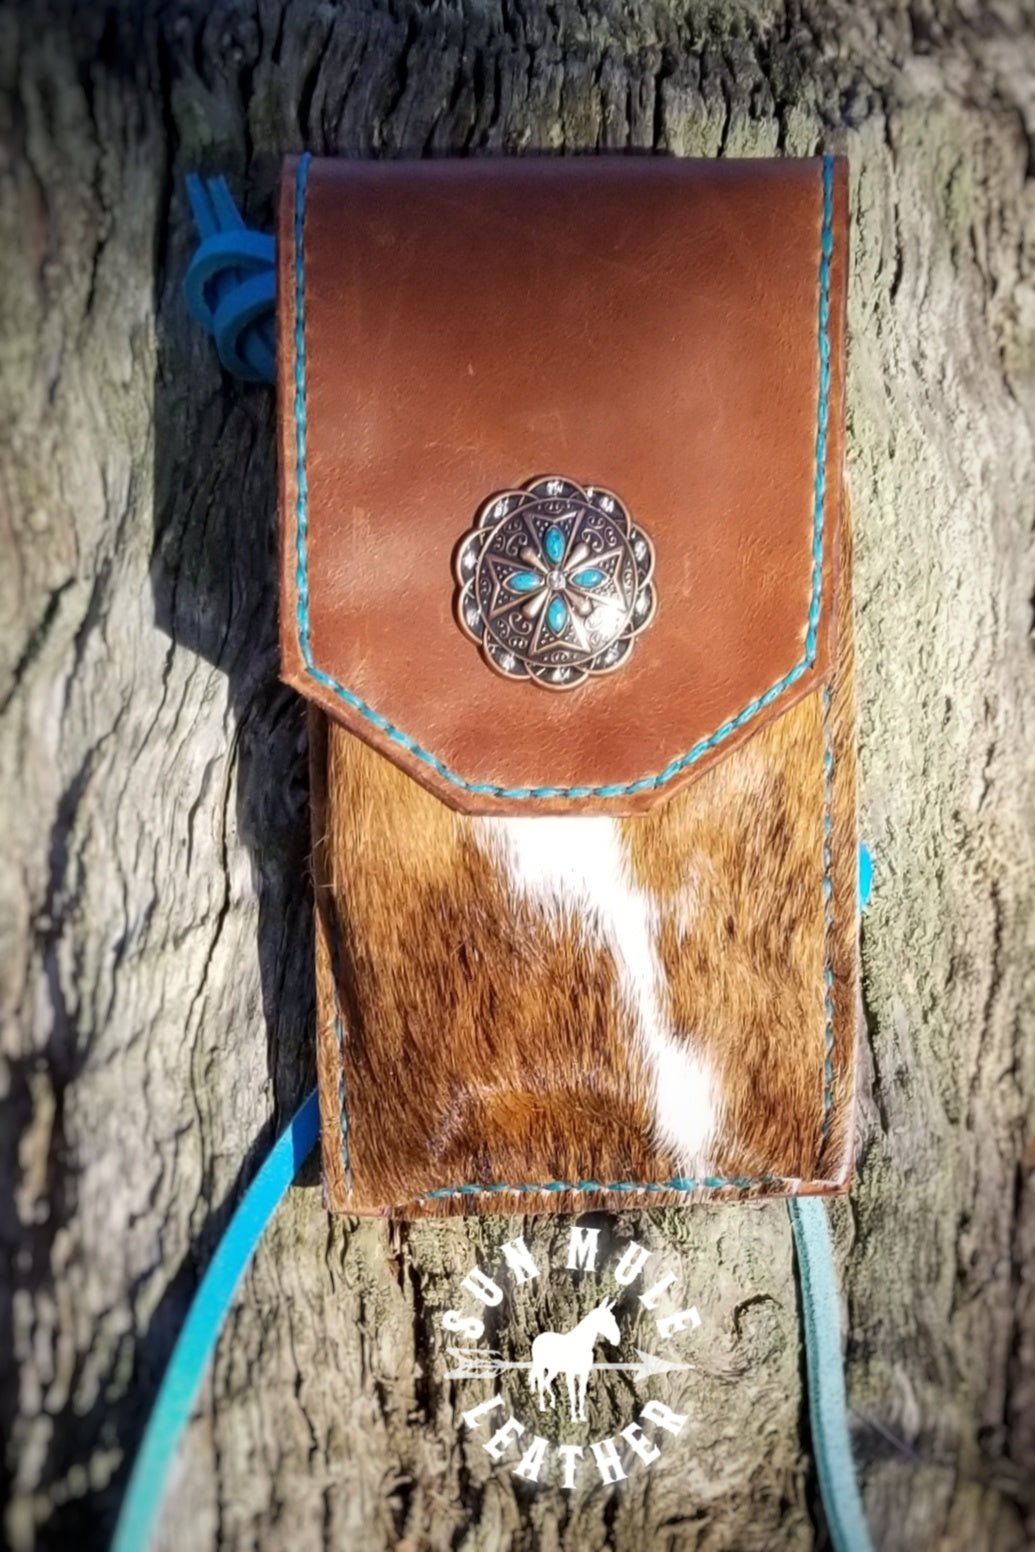 Phone holder pouch for saddle or belt with copper cross concho